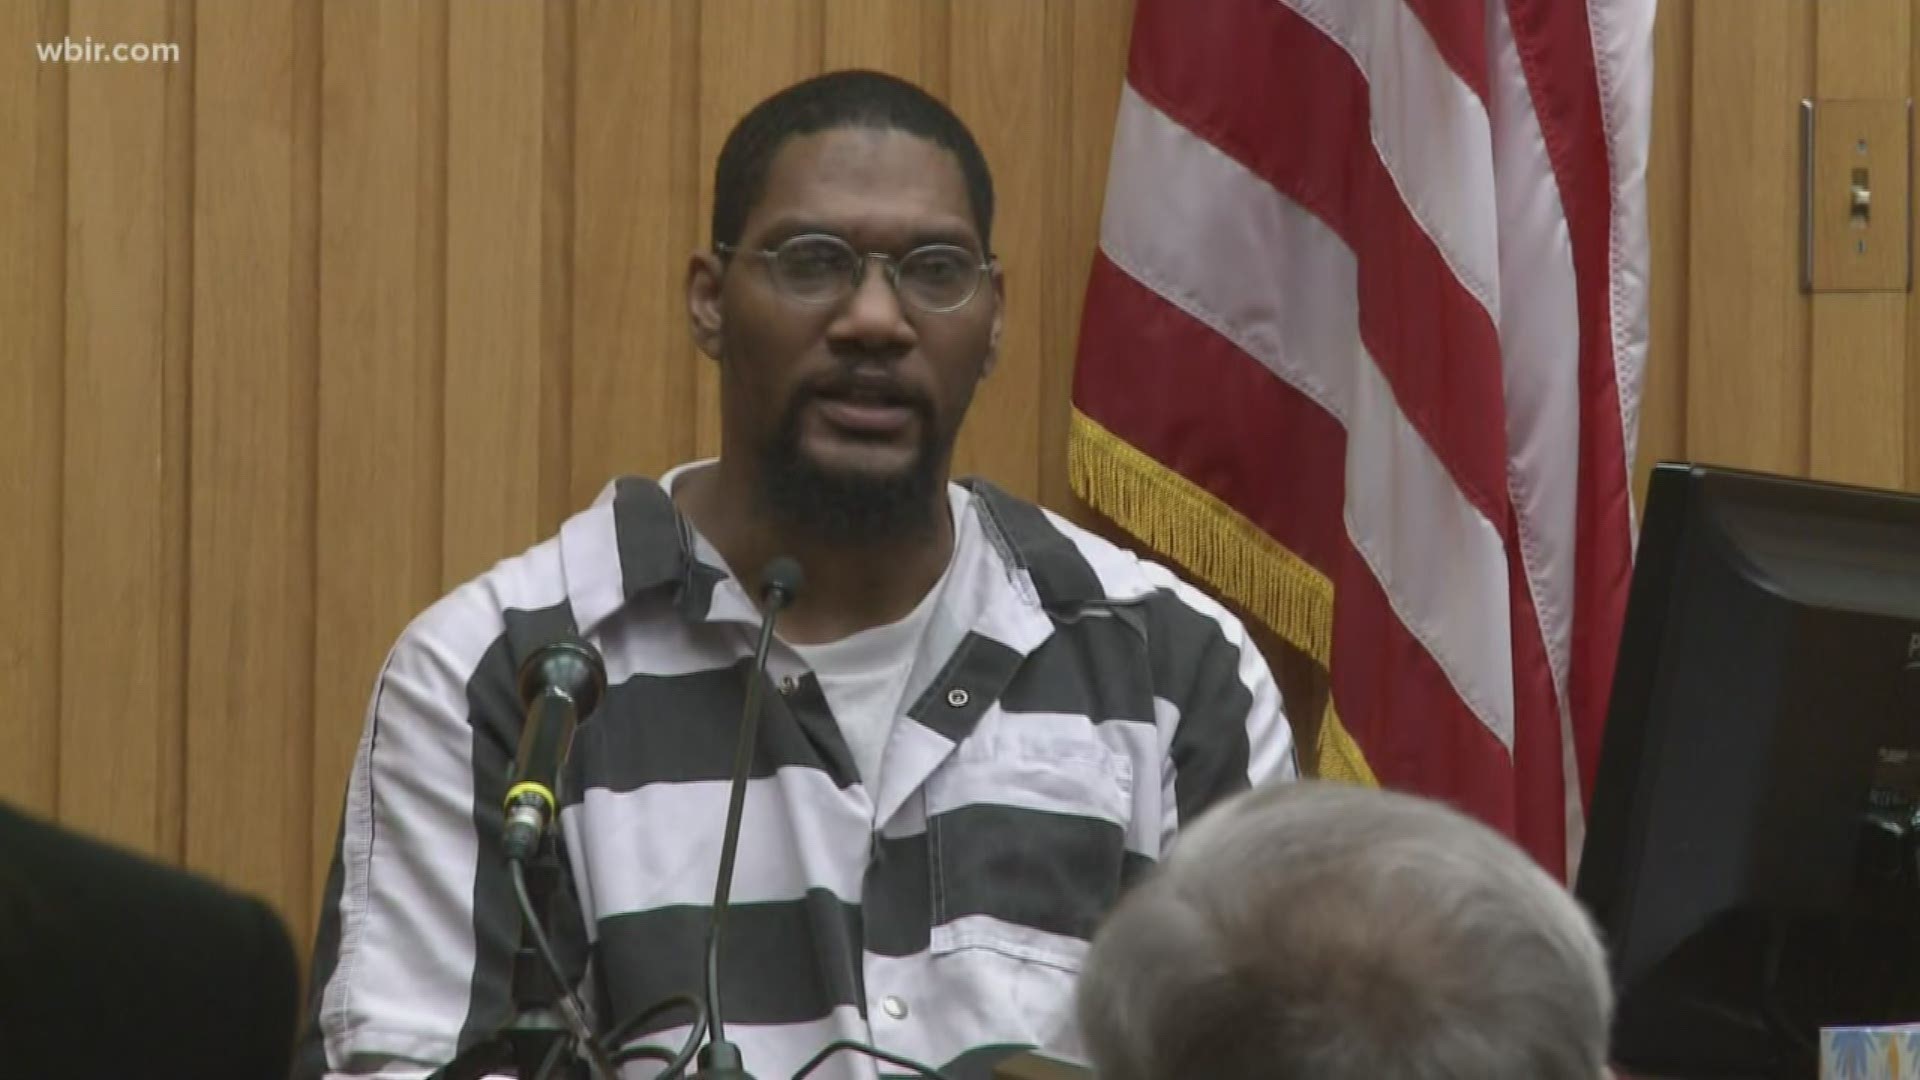 Convicted killer George Thomas takes the stand to testify against Eric Boyd. Twelve years after the murder of a young Knox County couple, Boyd, 47, faces charges including kidnapping, rape and murder. He's accused of having a direct role in the attacks on Chris Newsom, 23, and Channon Christian, 21, in January 2007.